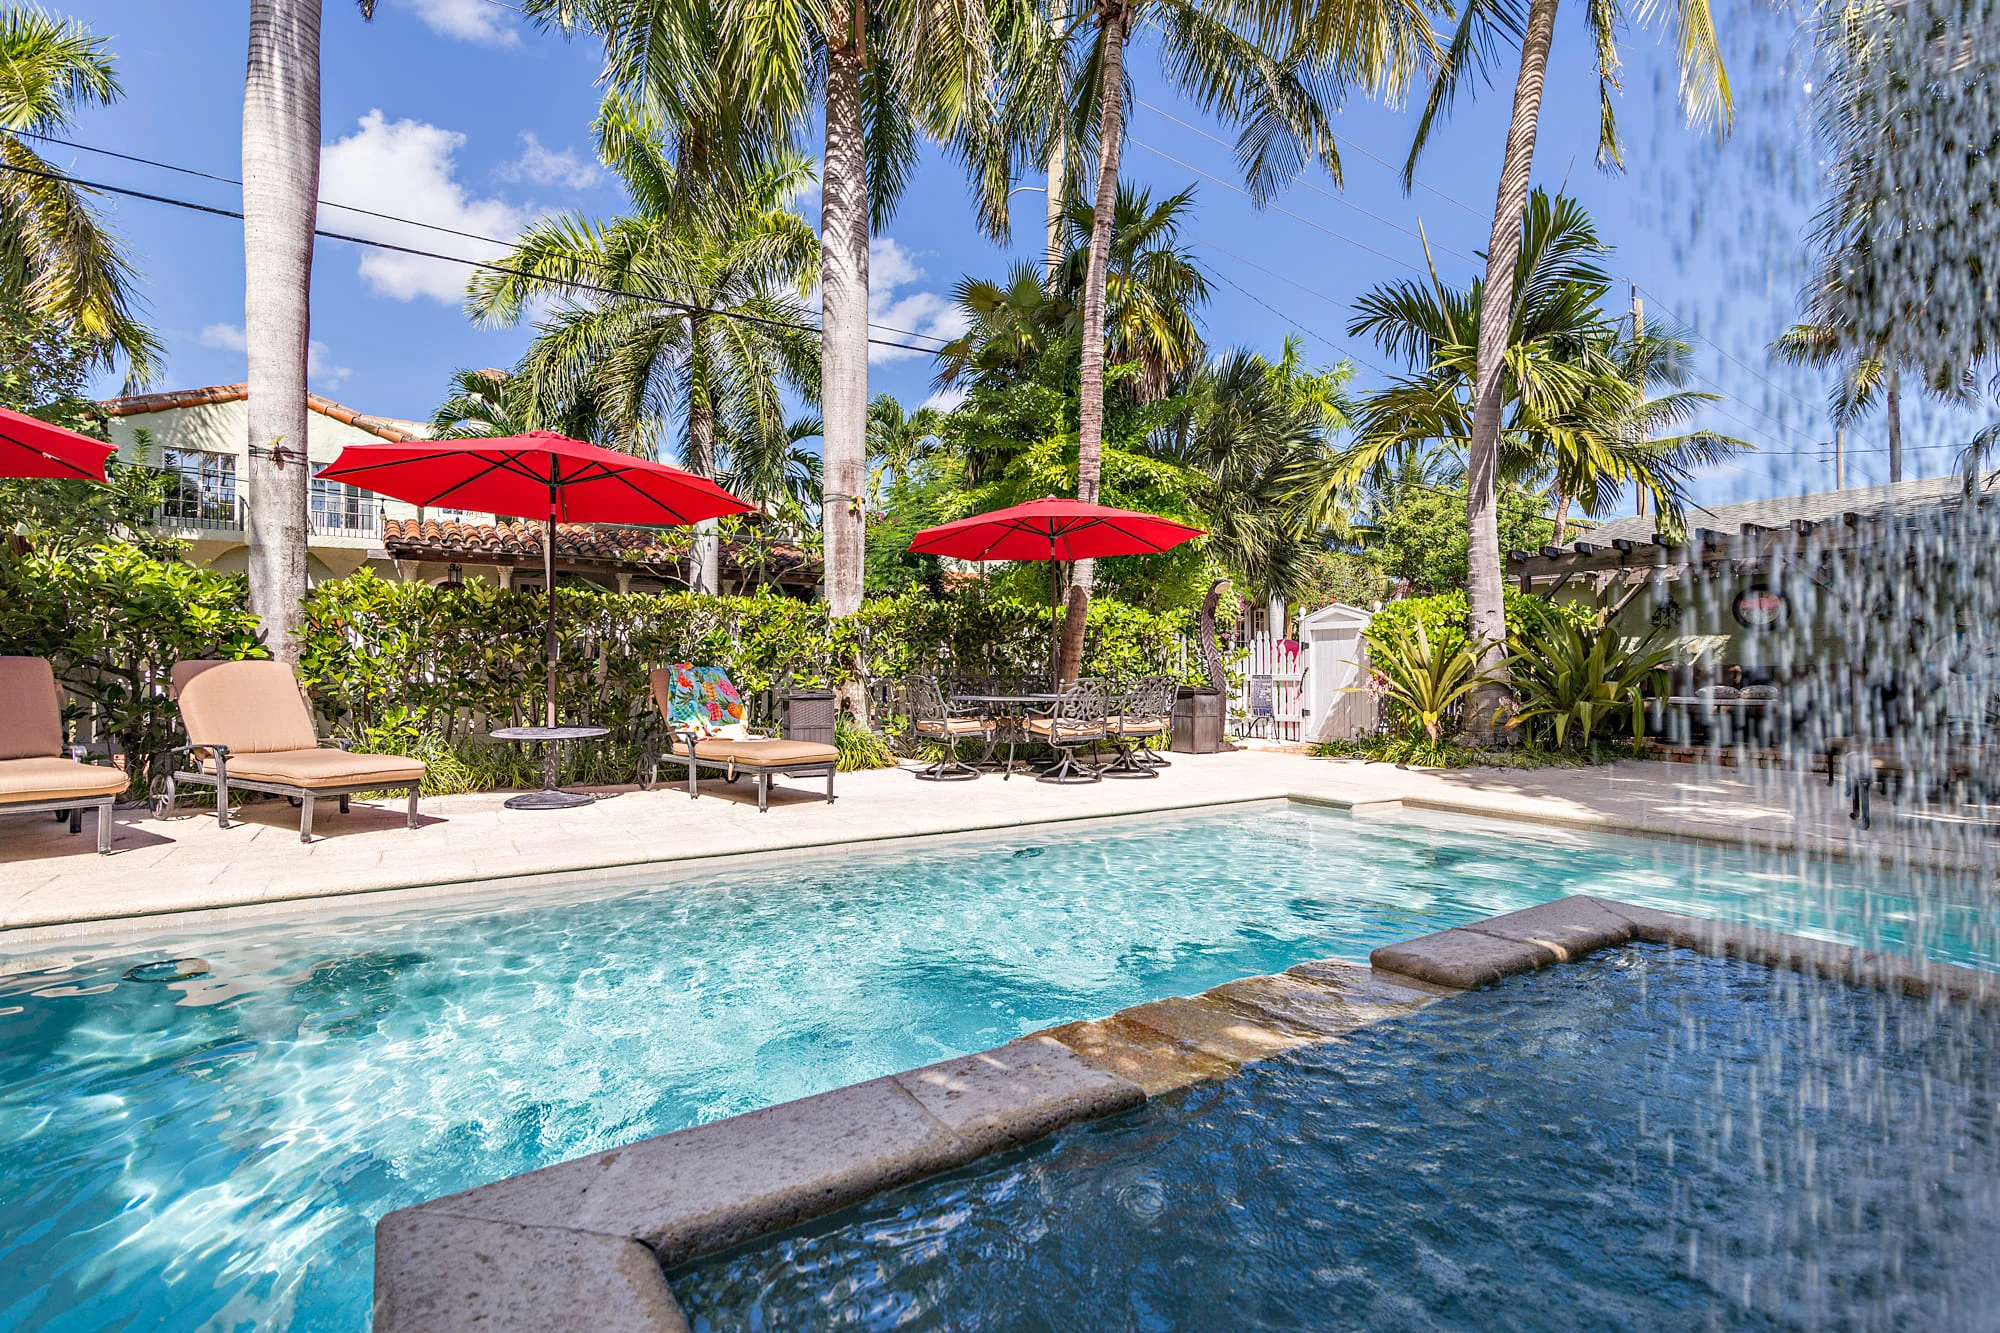 Image of chaises and red umbrellas overlooking the pool at Casa Grandview Bed and Breakfast